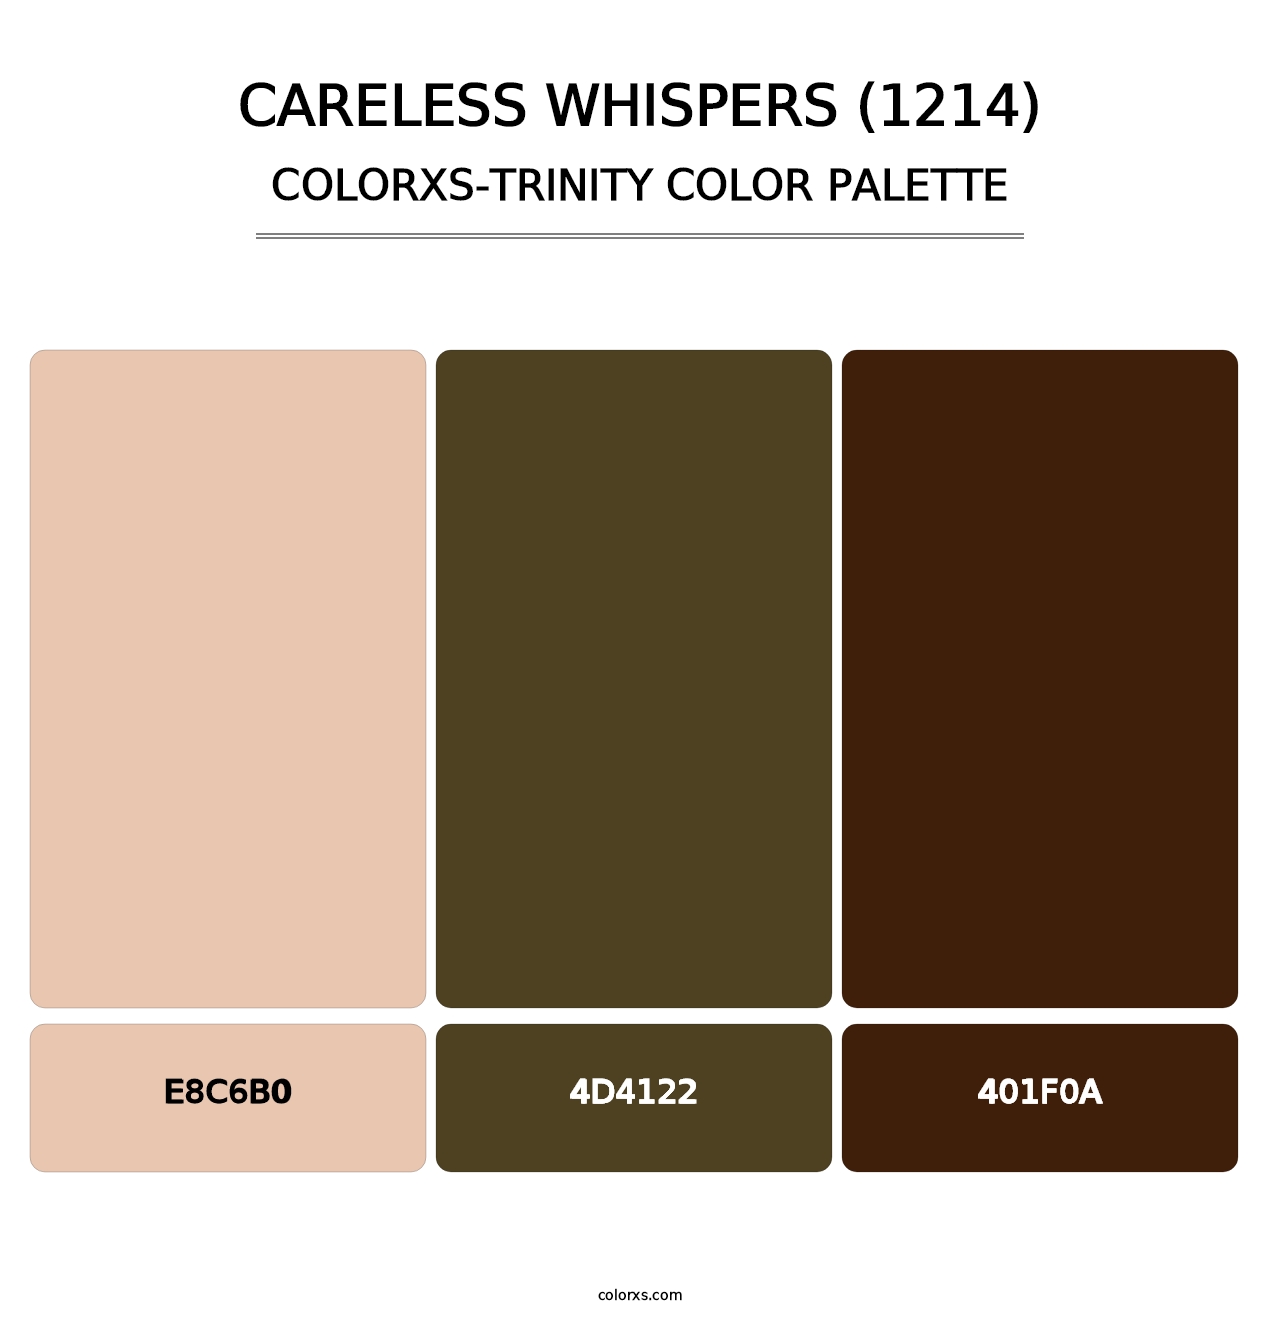 Careless Whispers (1214) - Colorxs Trinity Palette